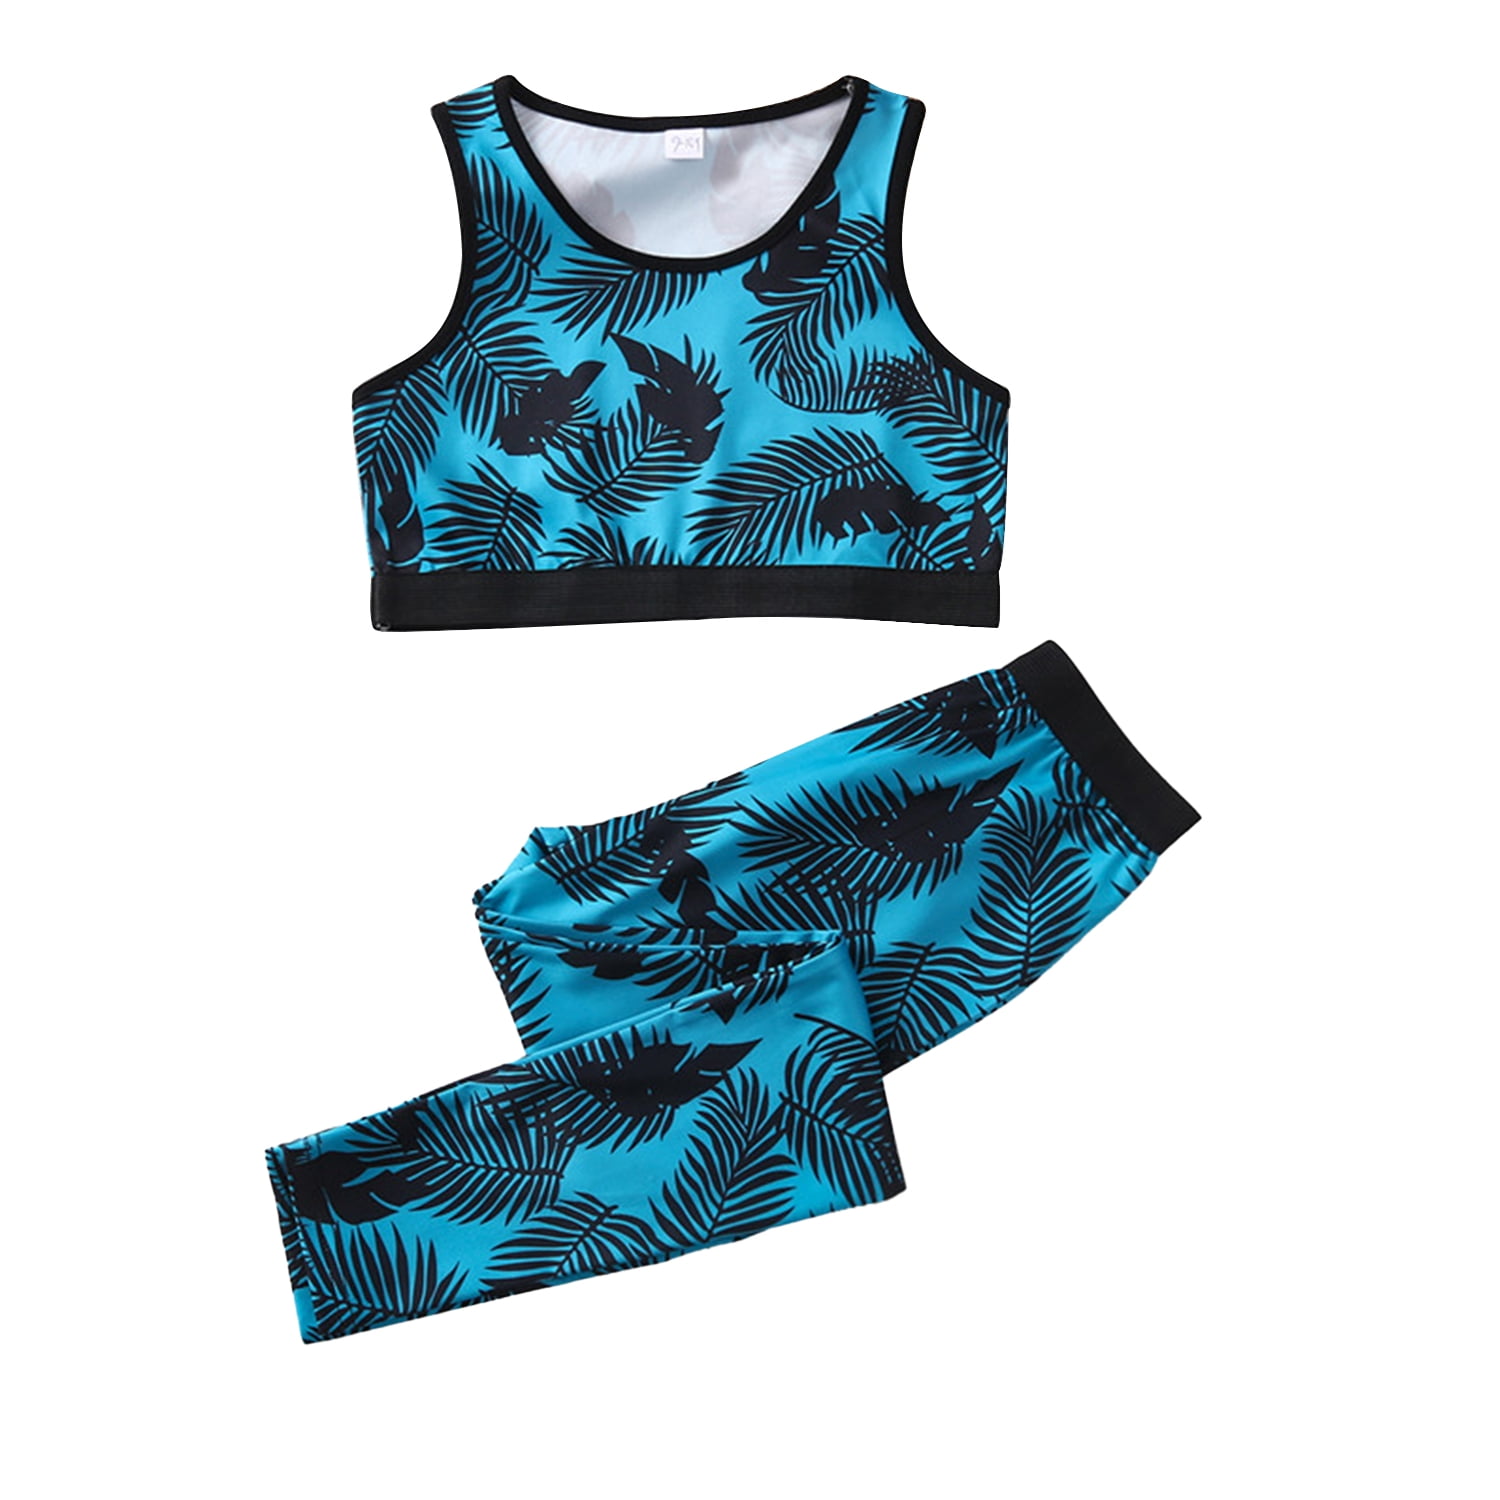 MUSIC NOTE GYMNASTIC DANCE RACER CROP TOP SIZE  9-10 YEARS 